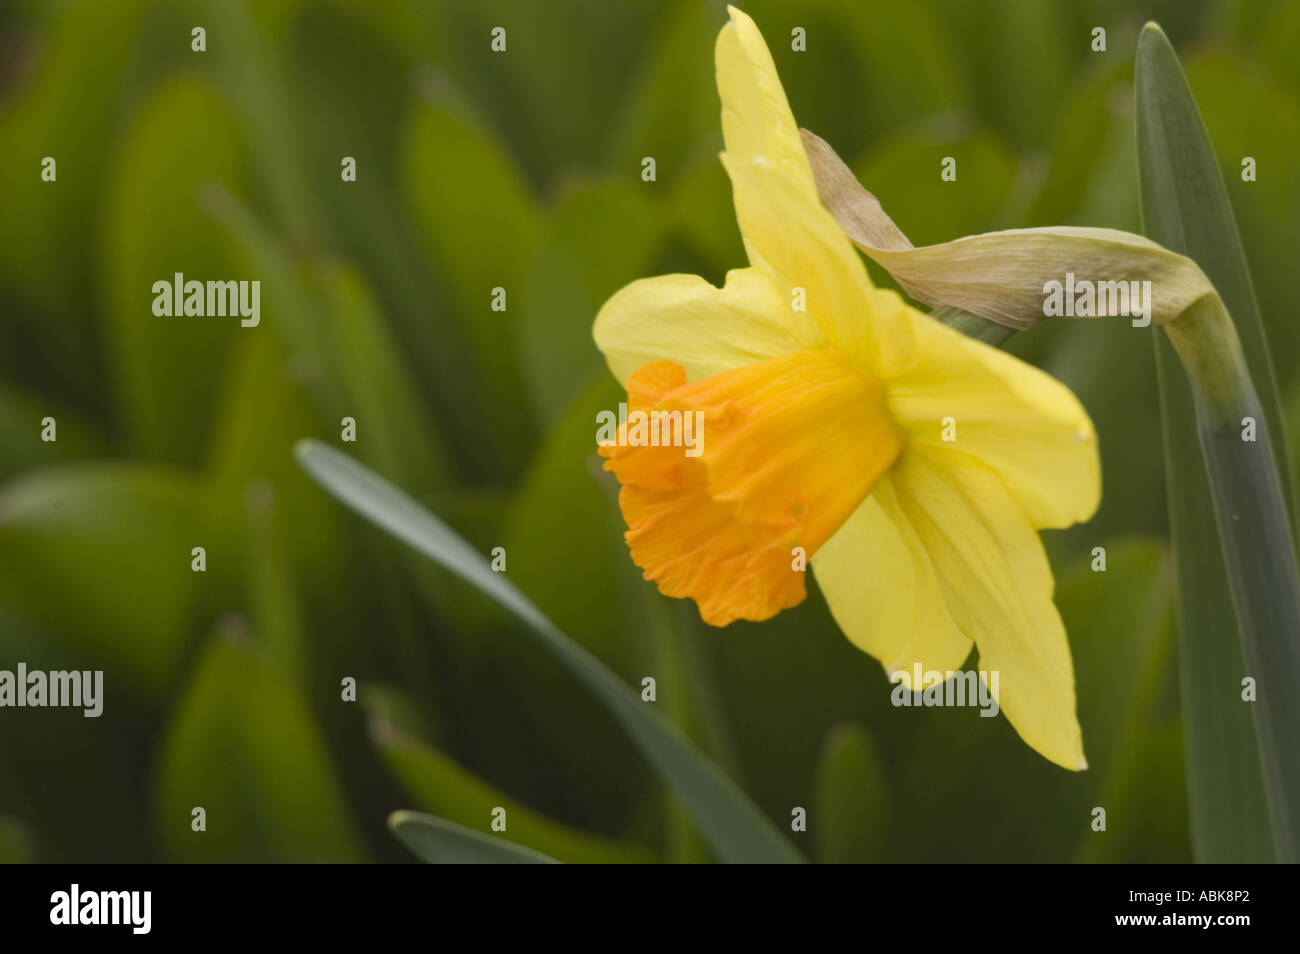 Alone flowers of yellow spring daffodil Amarylidaceae Narcissus Carbineer by A M Willson 1927 Stock Photo